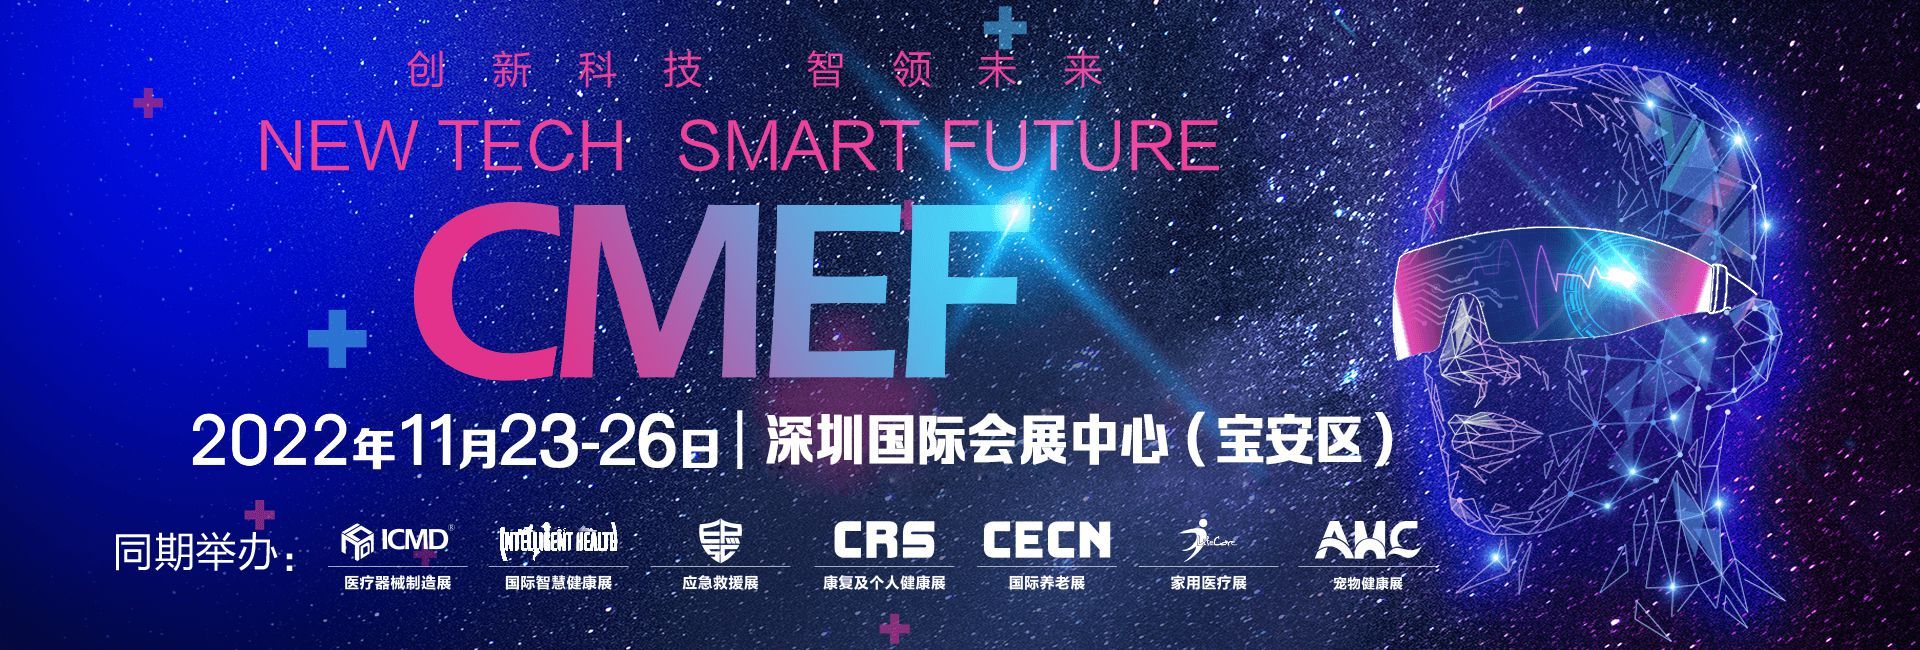 Goodwood meets you at 2022 China CMEF!Medical equipment exhibition